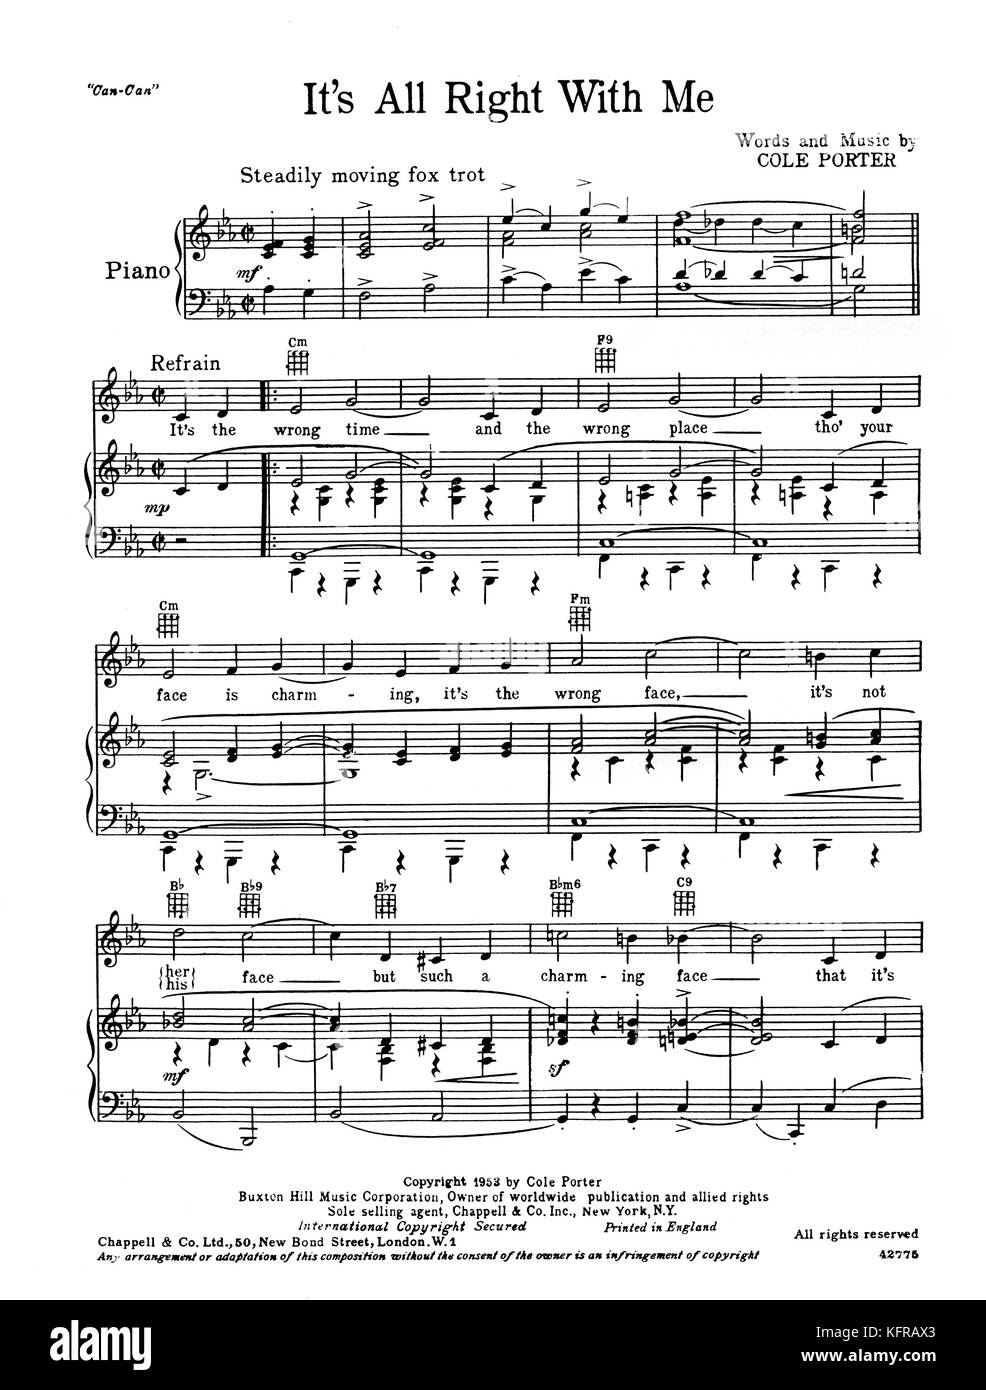 Score for 'It's All Right With Me' by Cole Porter from the 1953 musical,  'Can-Can'. The song was also used in the 1998 musical 'High Society', and  has been performed by the